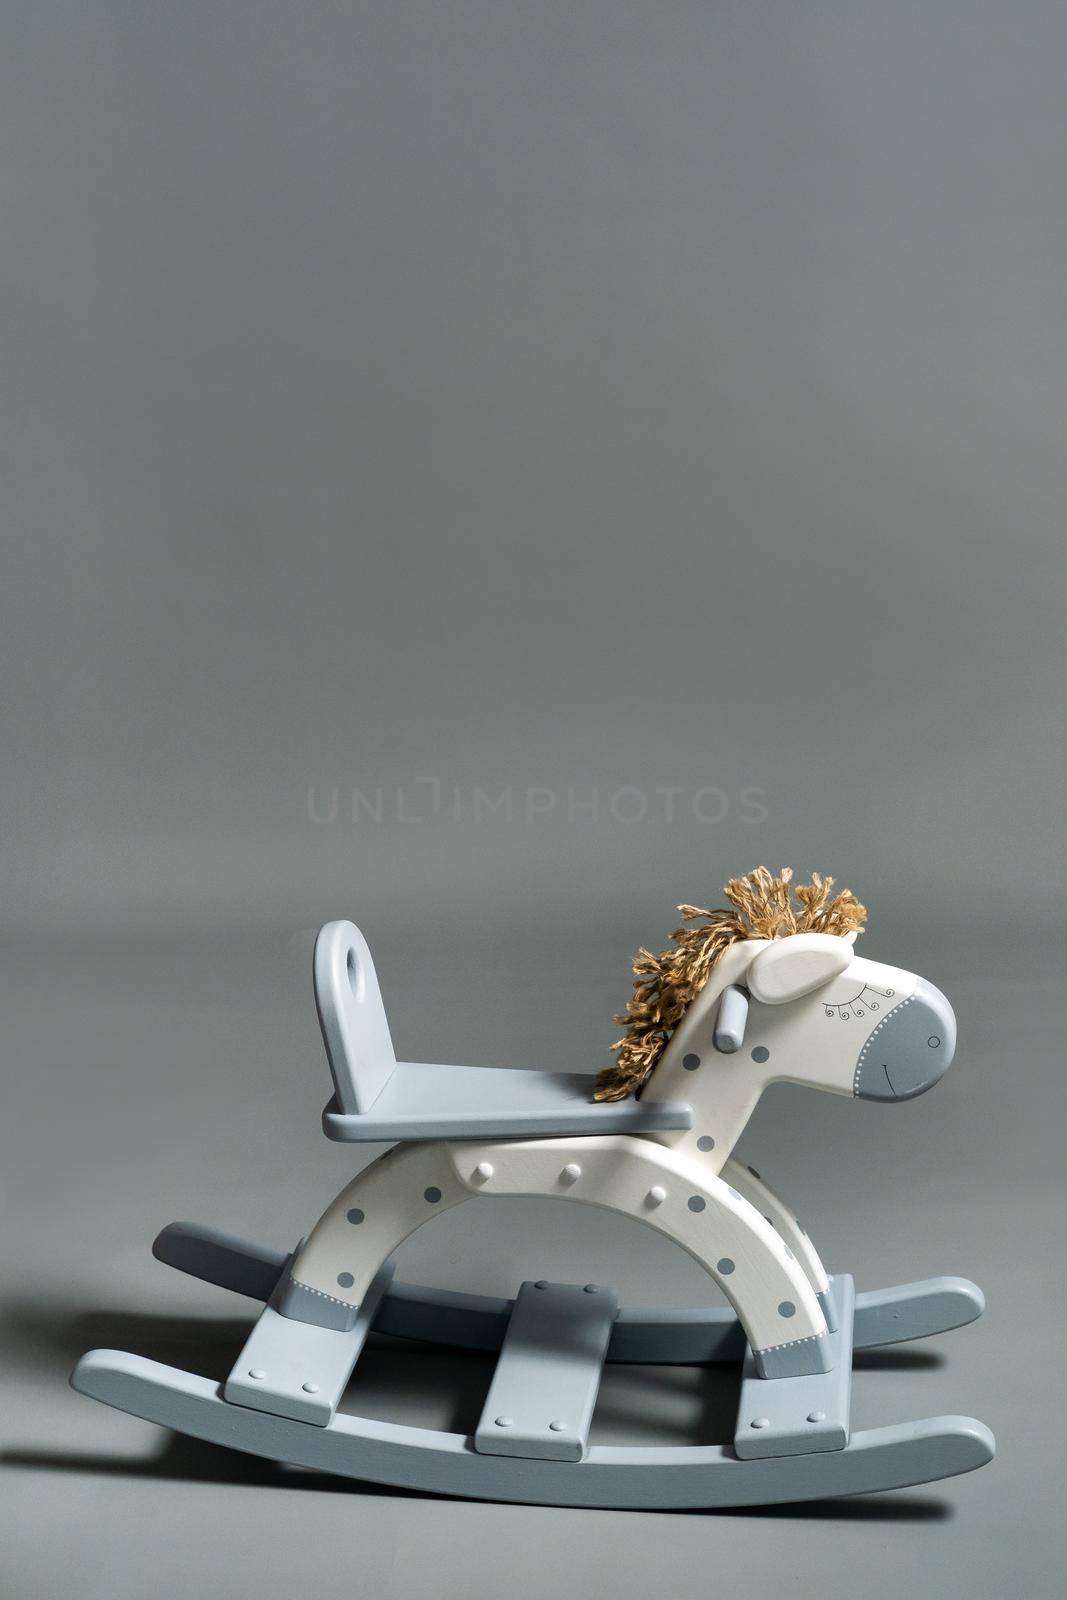 Handmade rocking horse on a gray background.